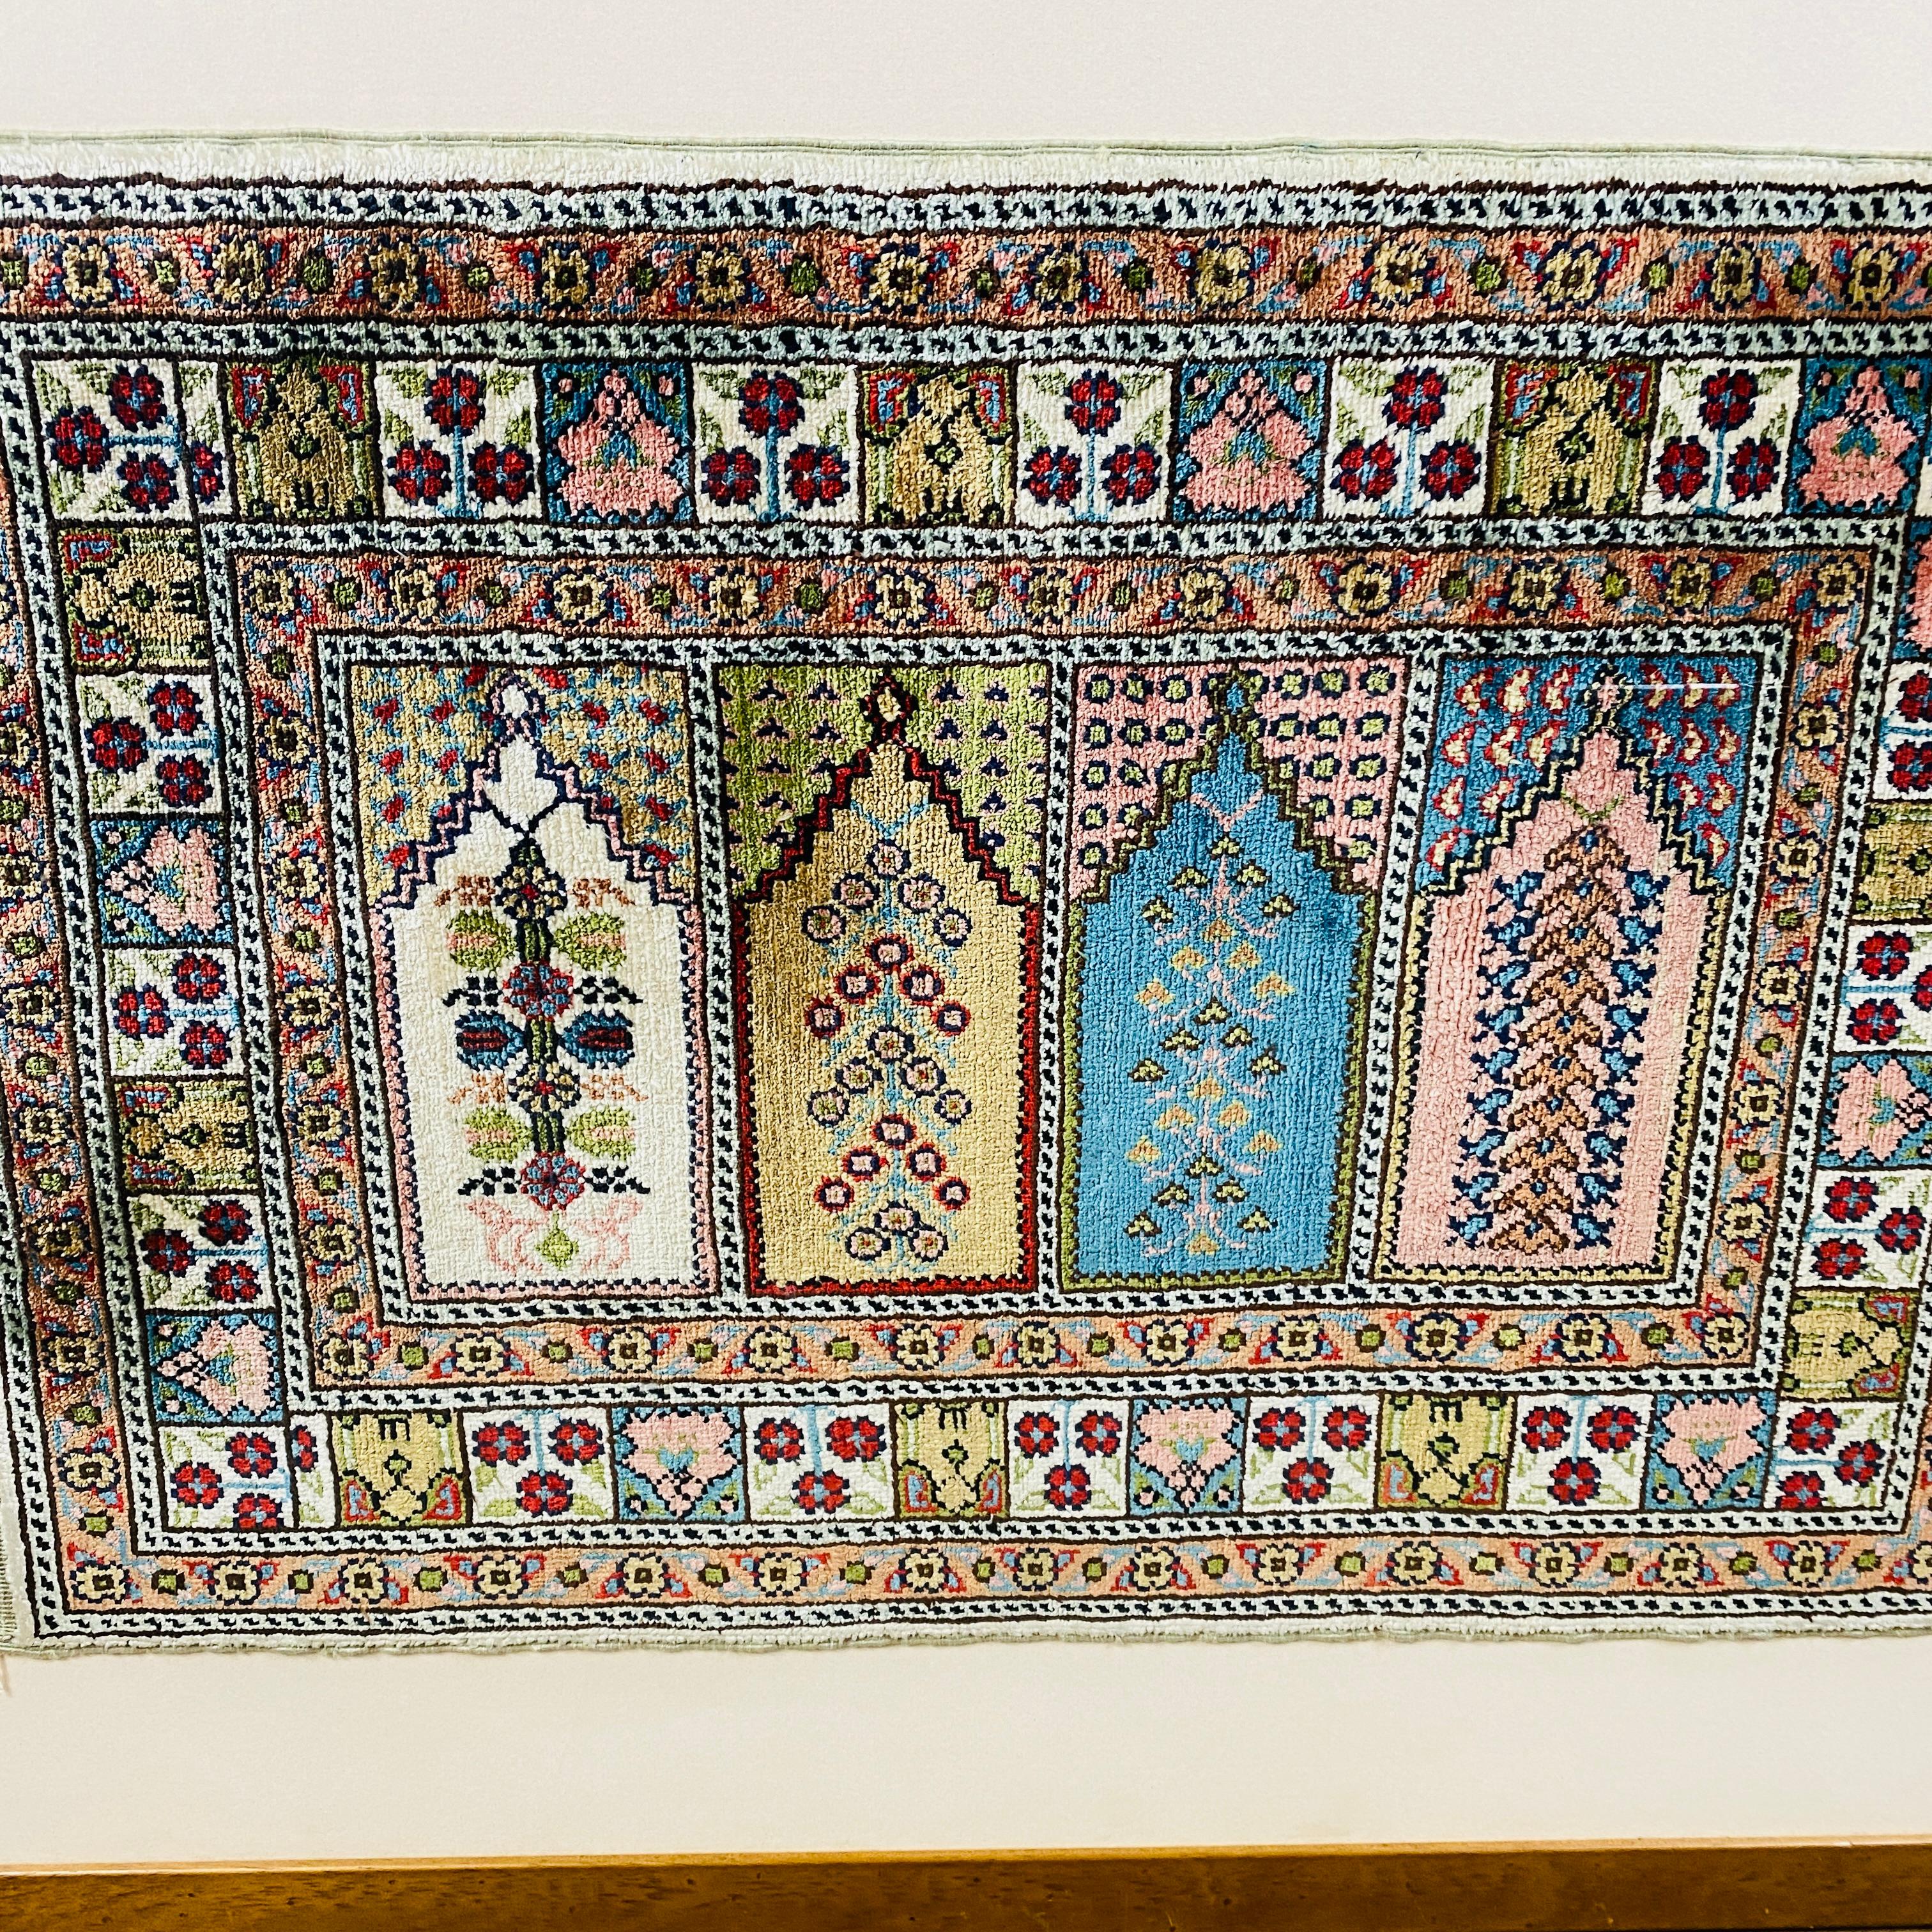 Framed + Glazed Persian Rug, Finely Knotted Silk In Good Condition For Sale In Ely, GB